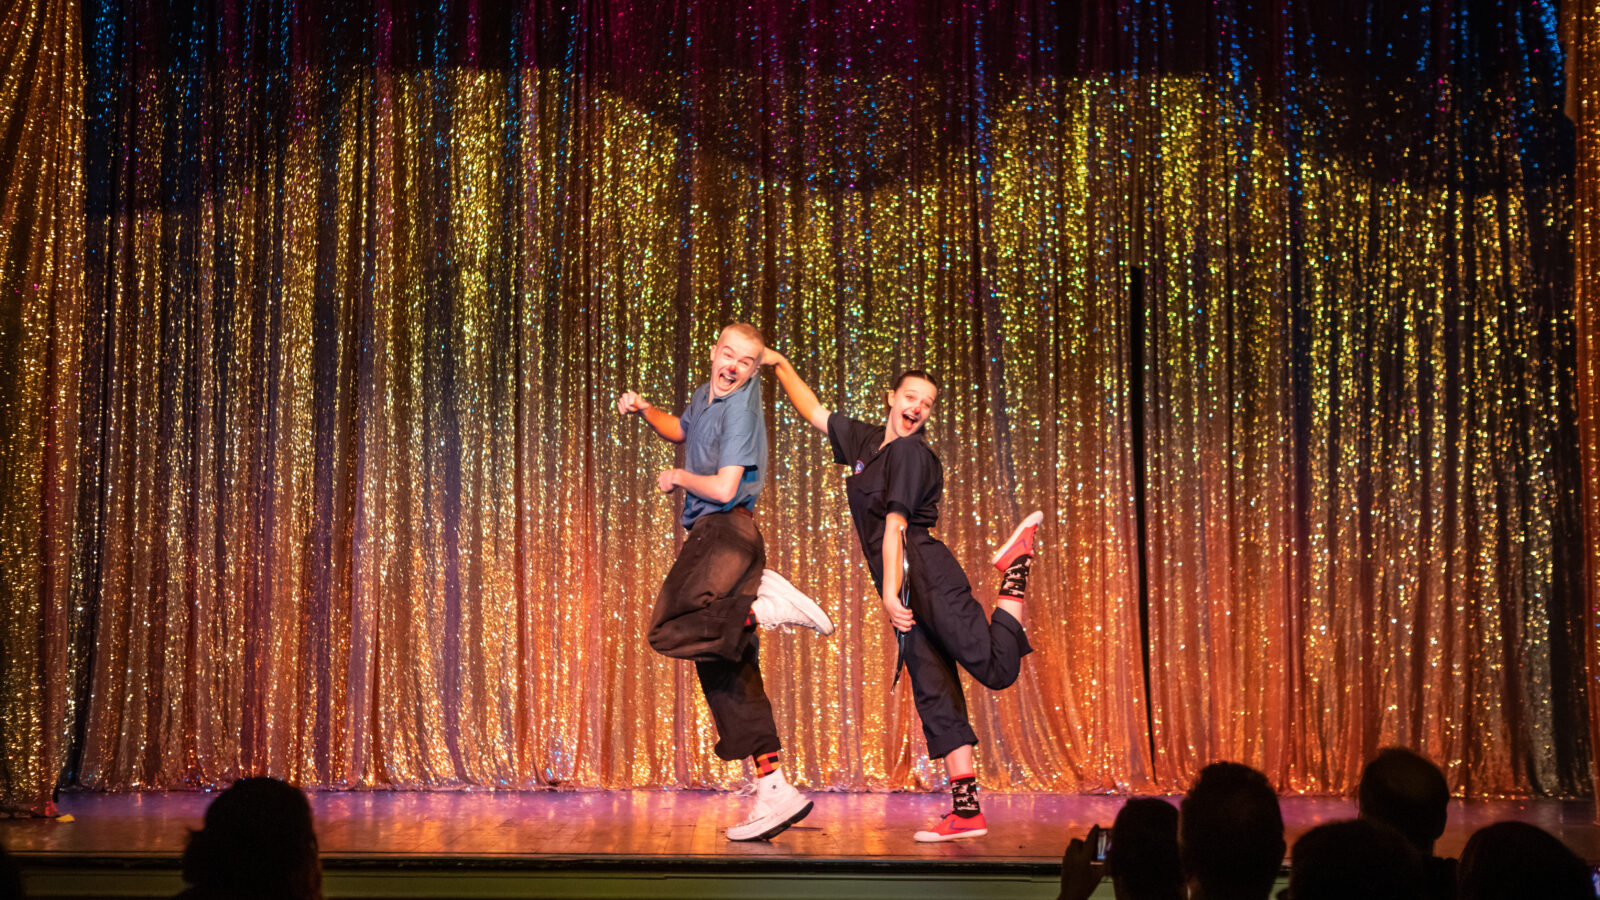 a photograph of Circus Smirkus performing at Highlight New Year's Eve. A light skinned young ma and woman dance in unison on a stage with a sparkly copper colored curtain behind them